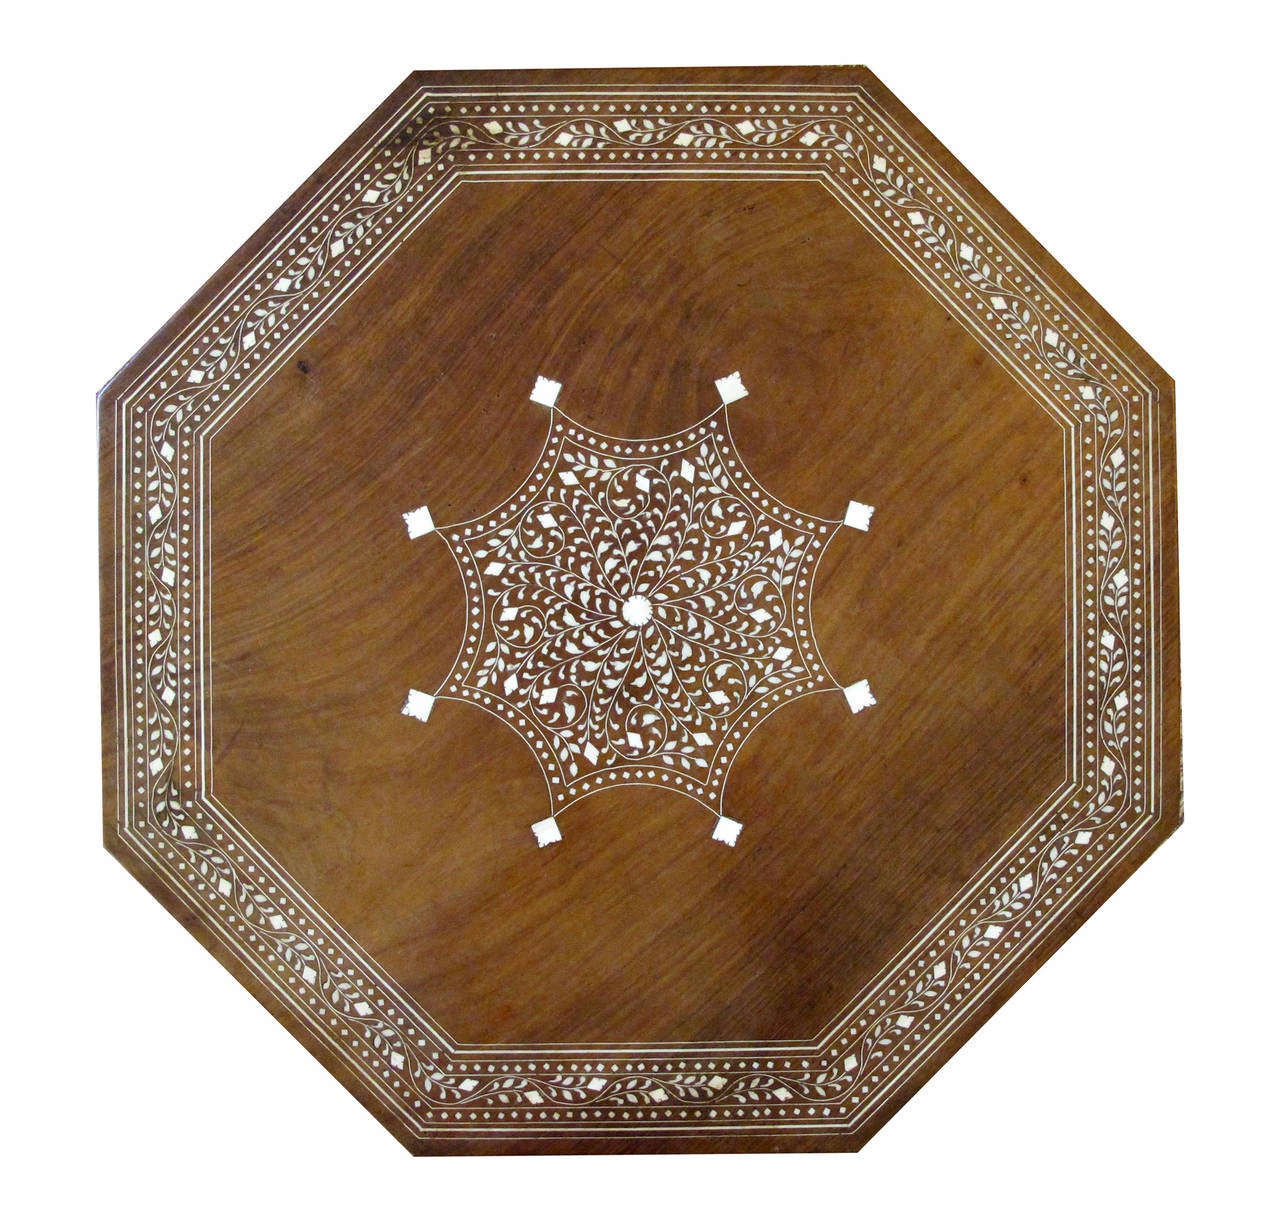 A handsome and intricately inlaid Anglo-Indian octagonal traveling table; the octagonal top centering an inlaid medallion within a foliate band; raised on arabesque supports